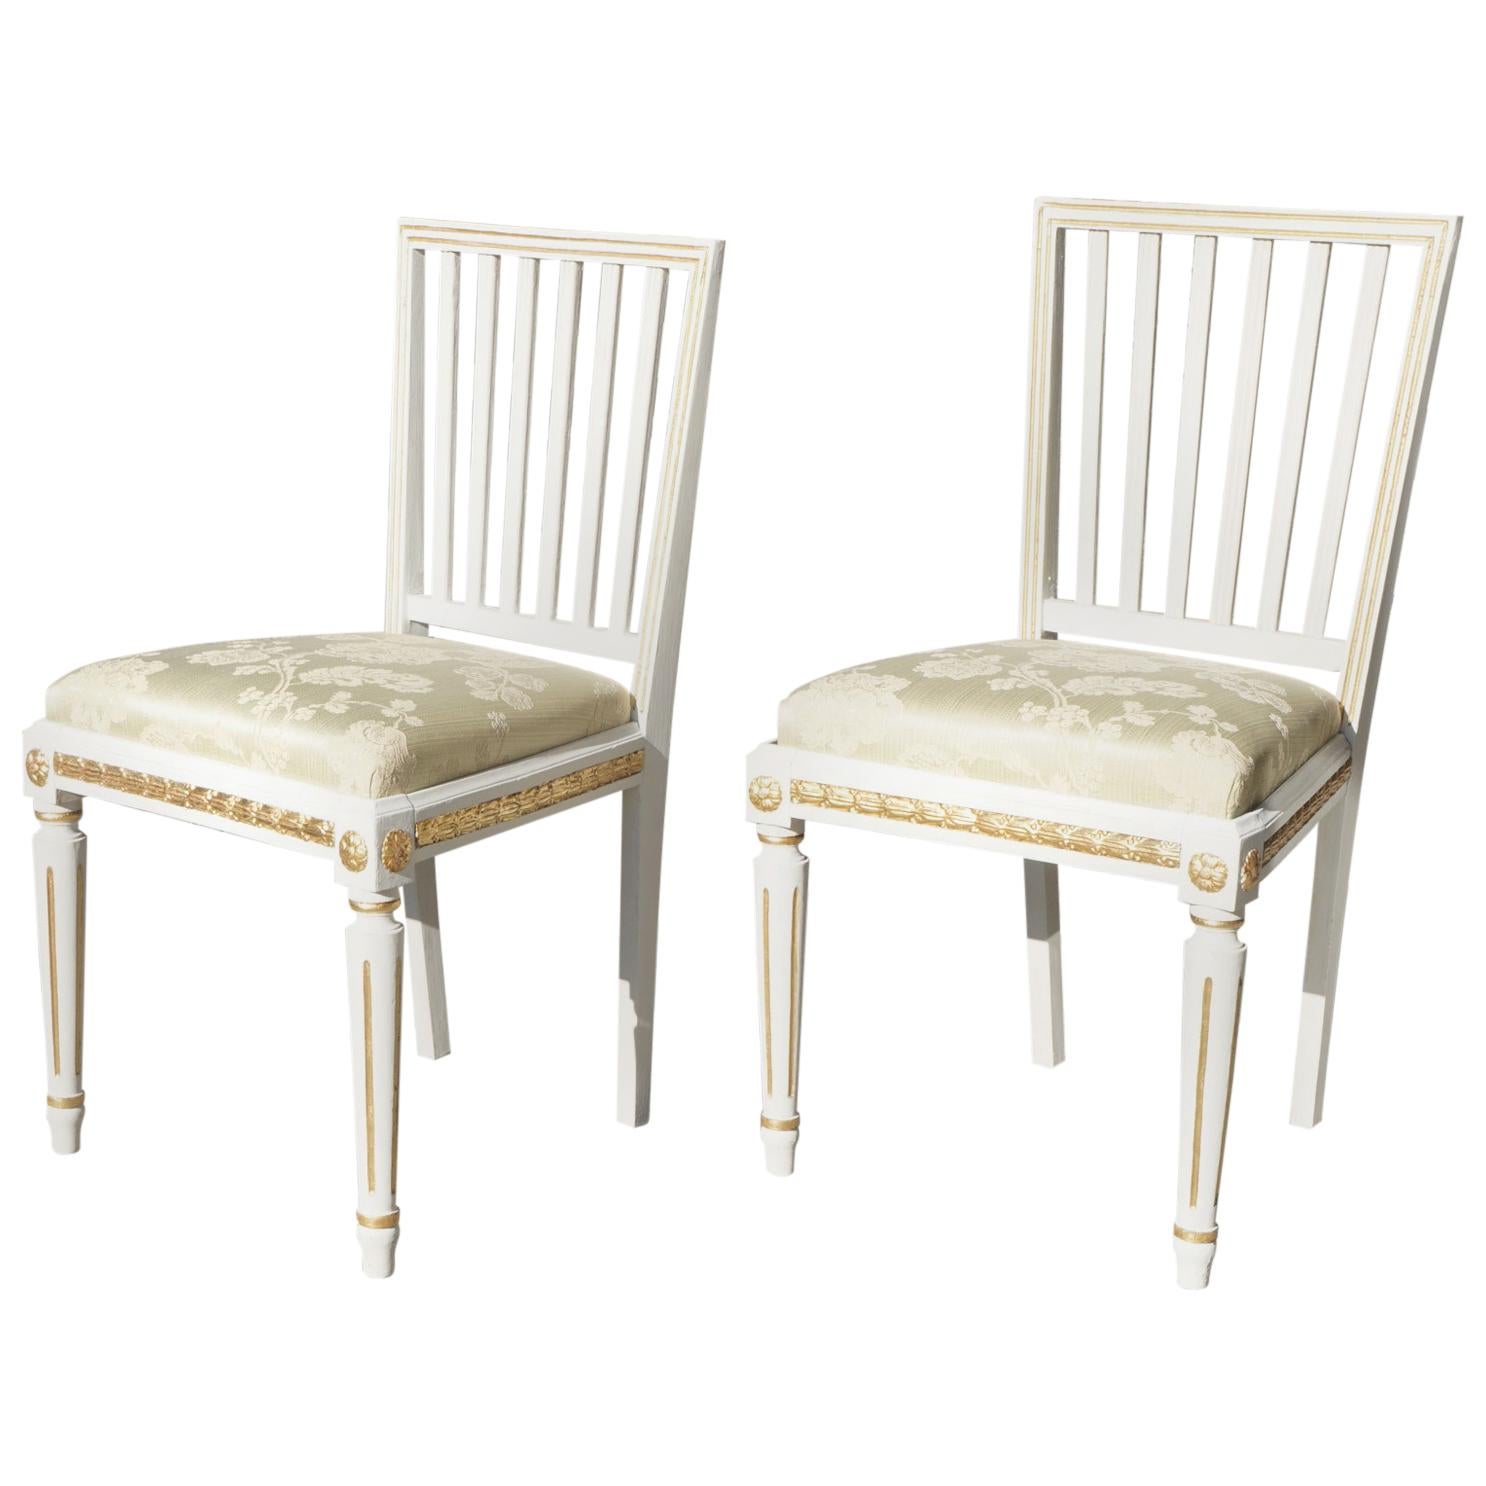 Pair of Gustavian 18th Century Swedish Painted and Gilded Side Chairs